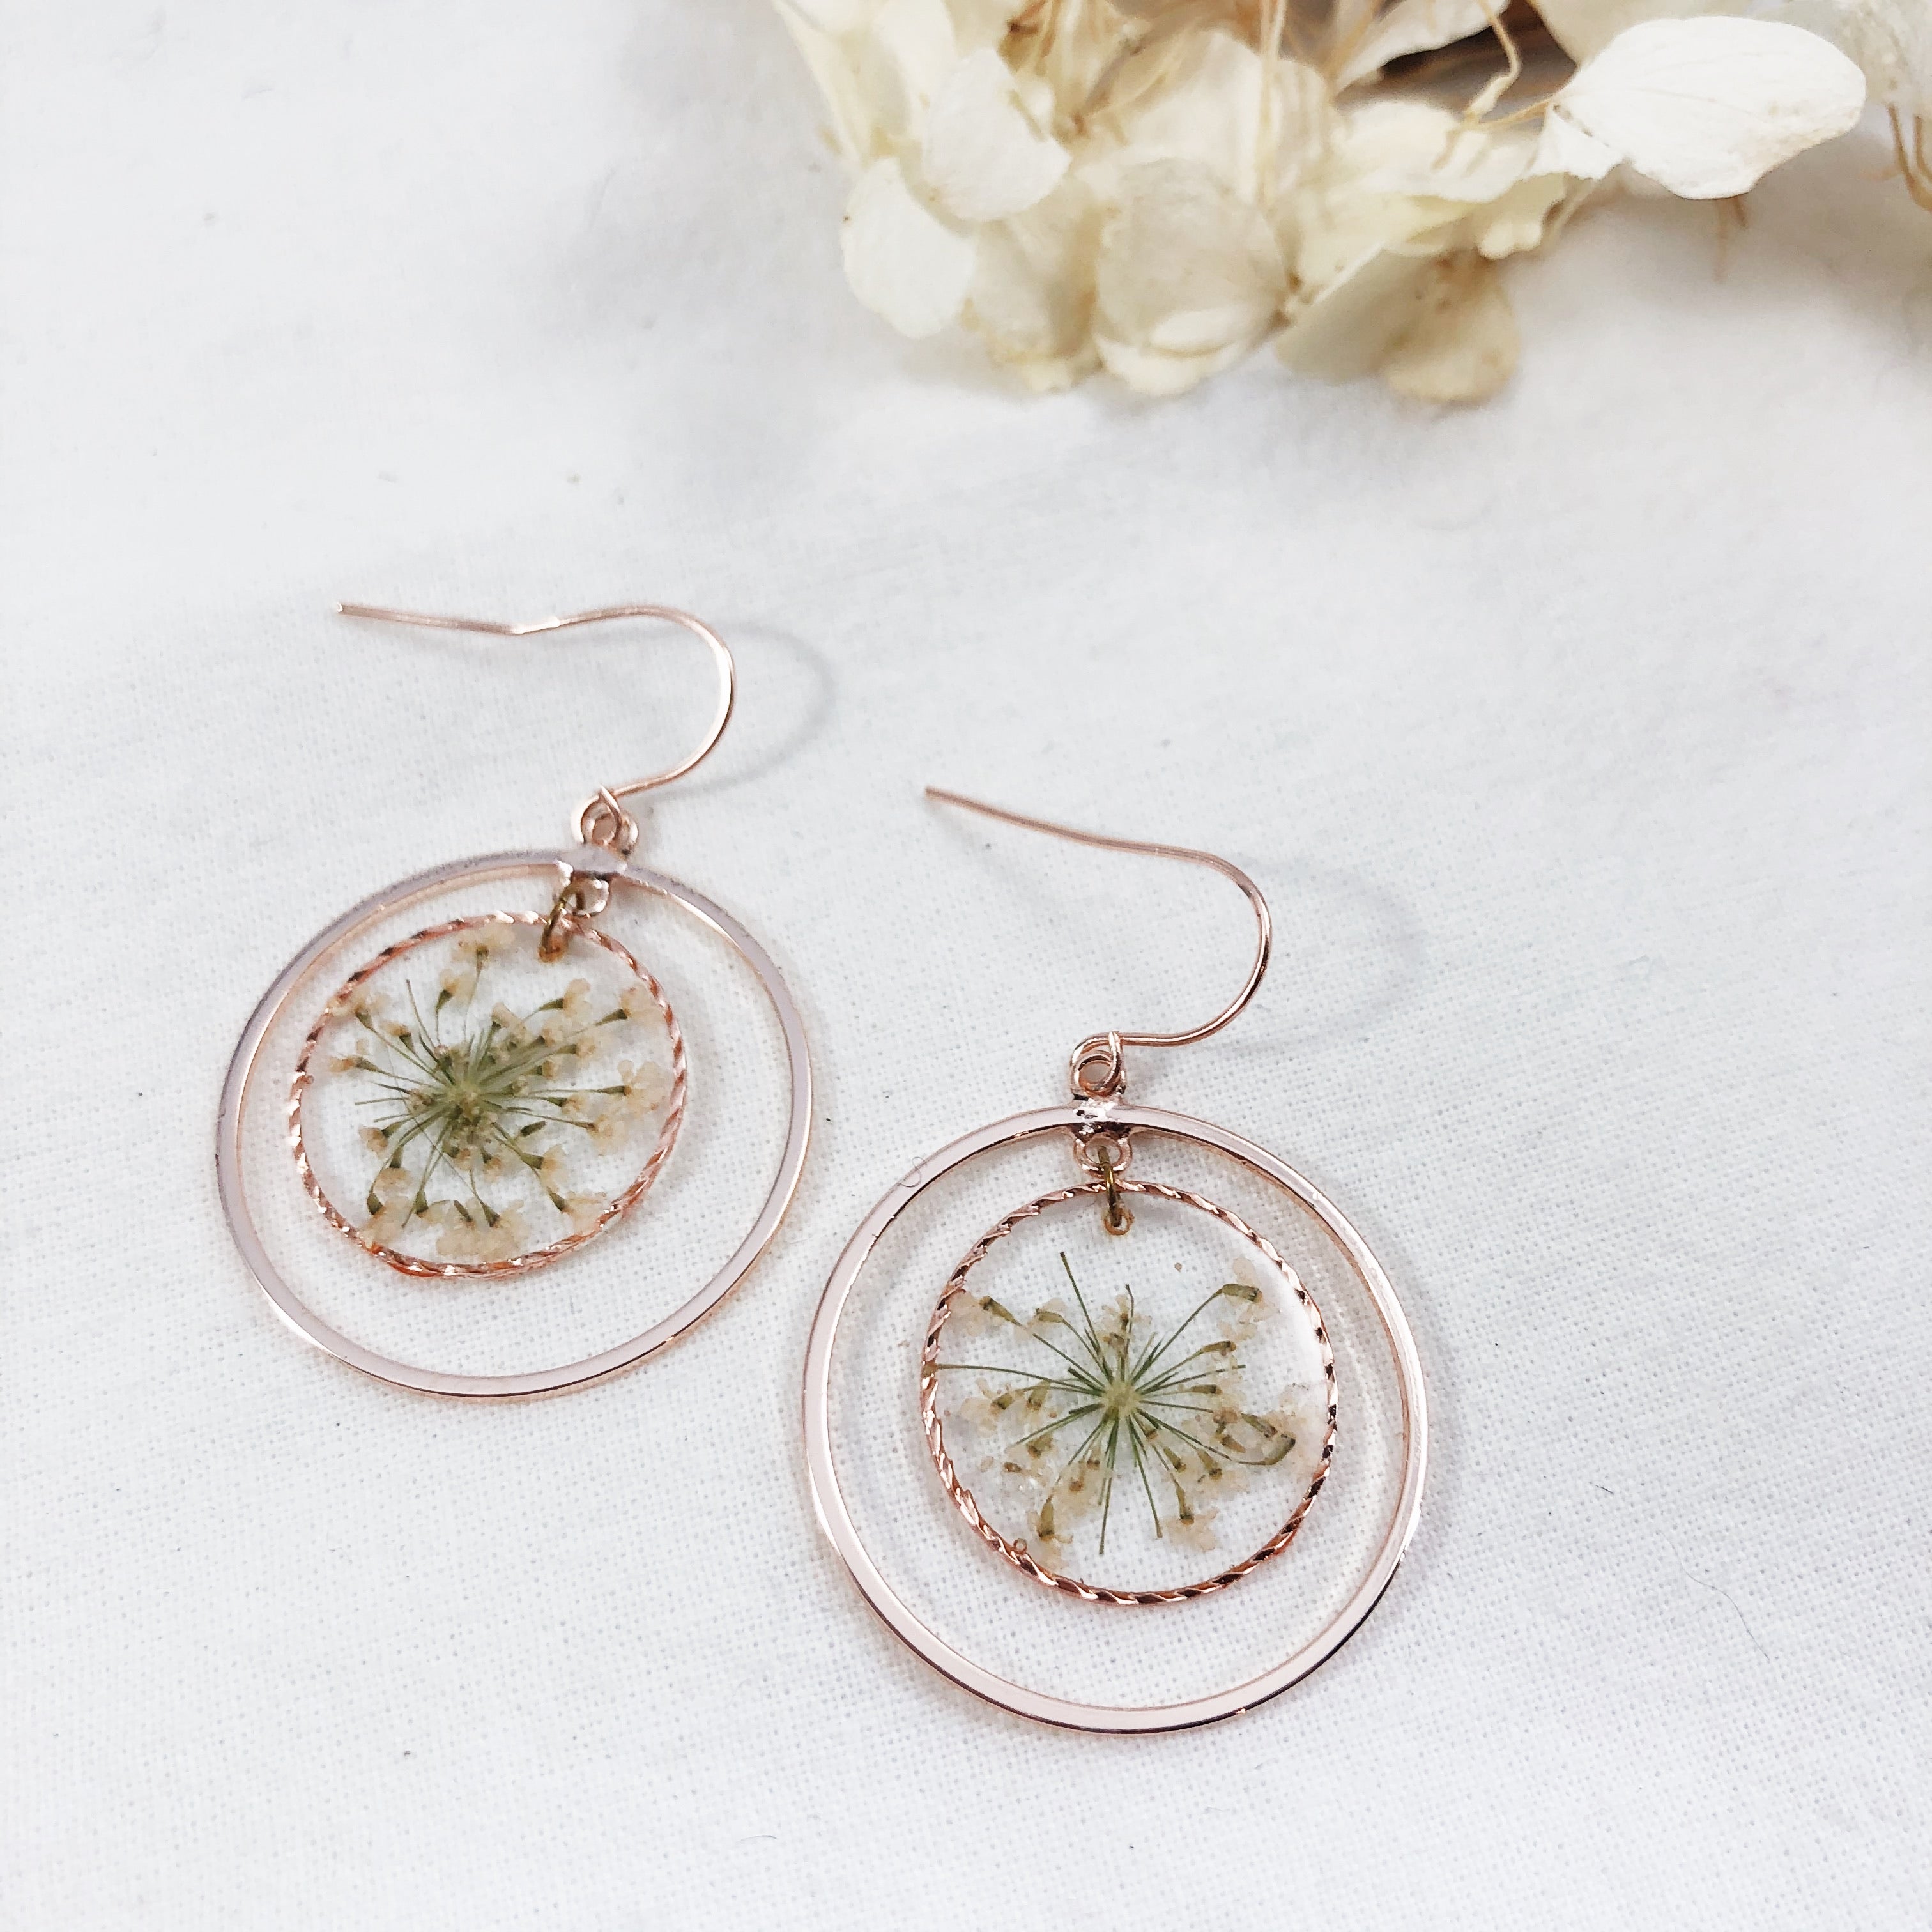 Queen Anne - Rose Gold Round Classic Earrings with Pressed Flowers